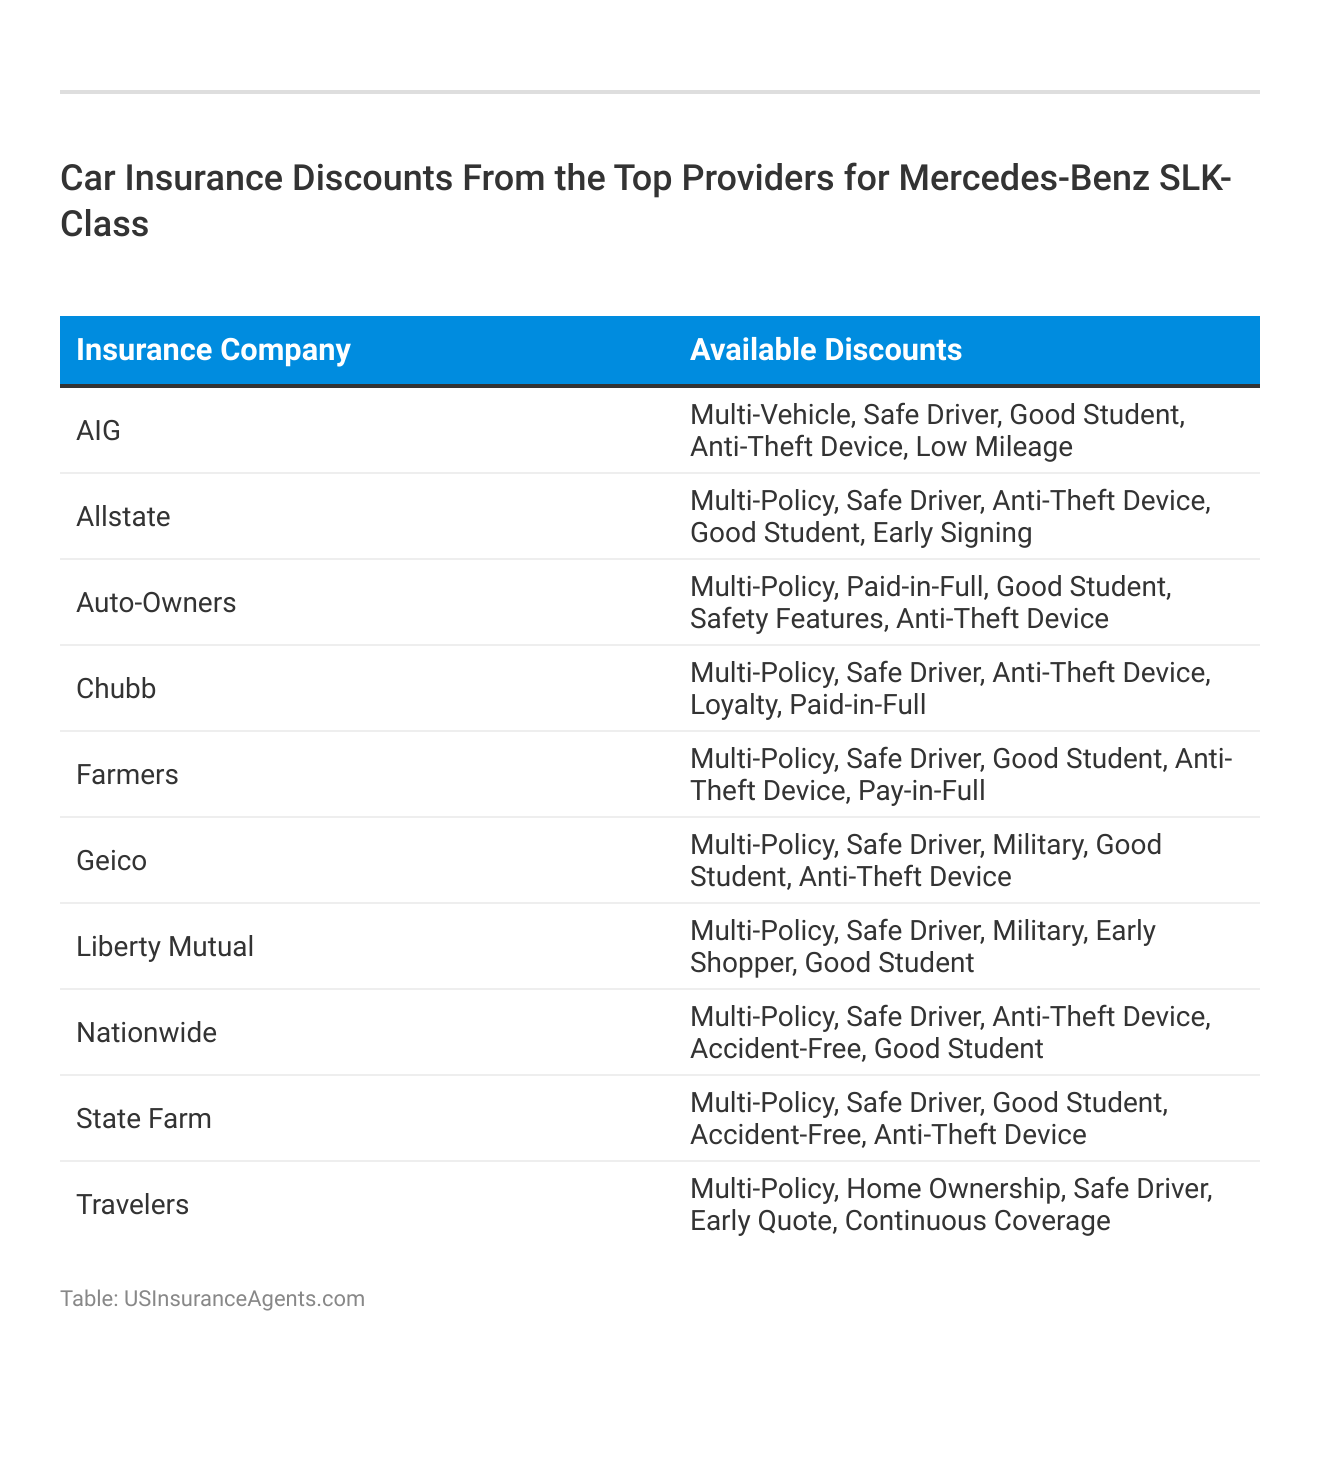 <h3>Car Insurance Discounts From the Top Providers for Mercedes-Benz SLK-Class</h3>